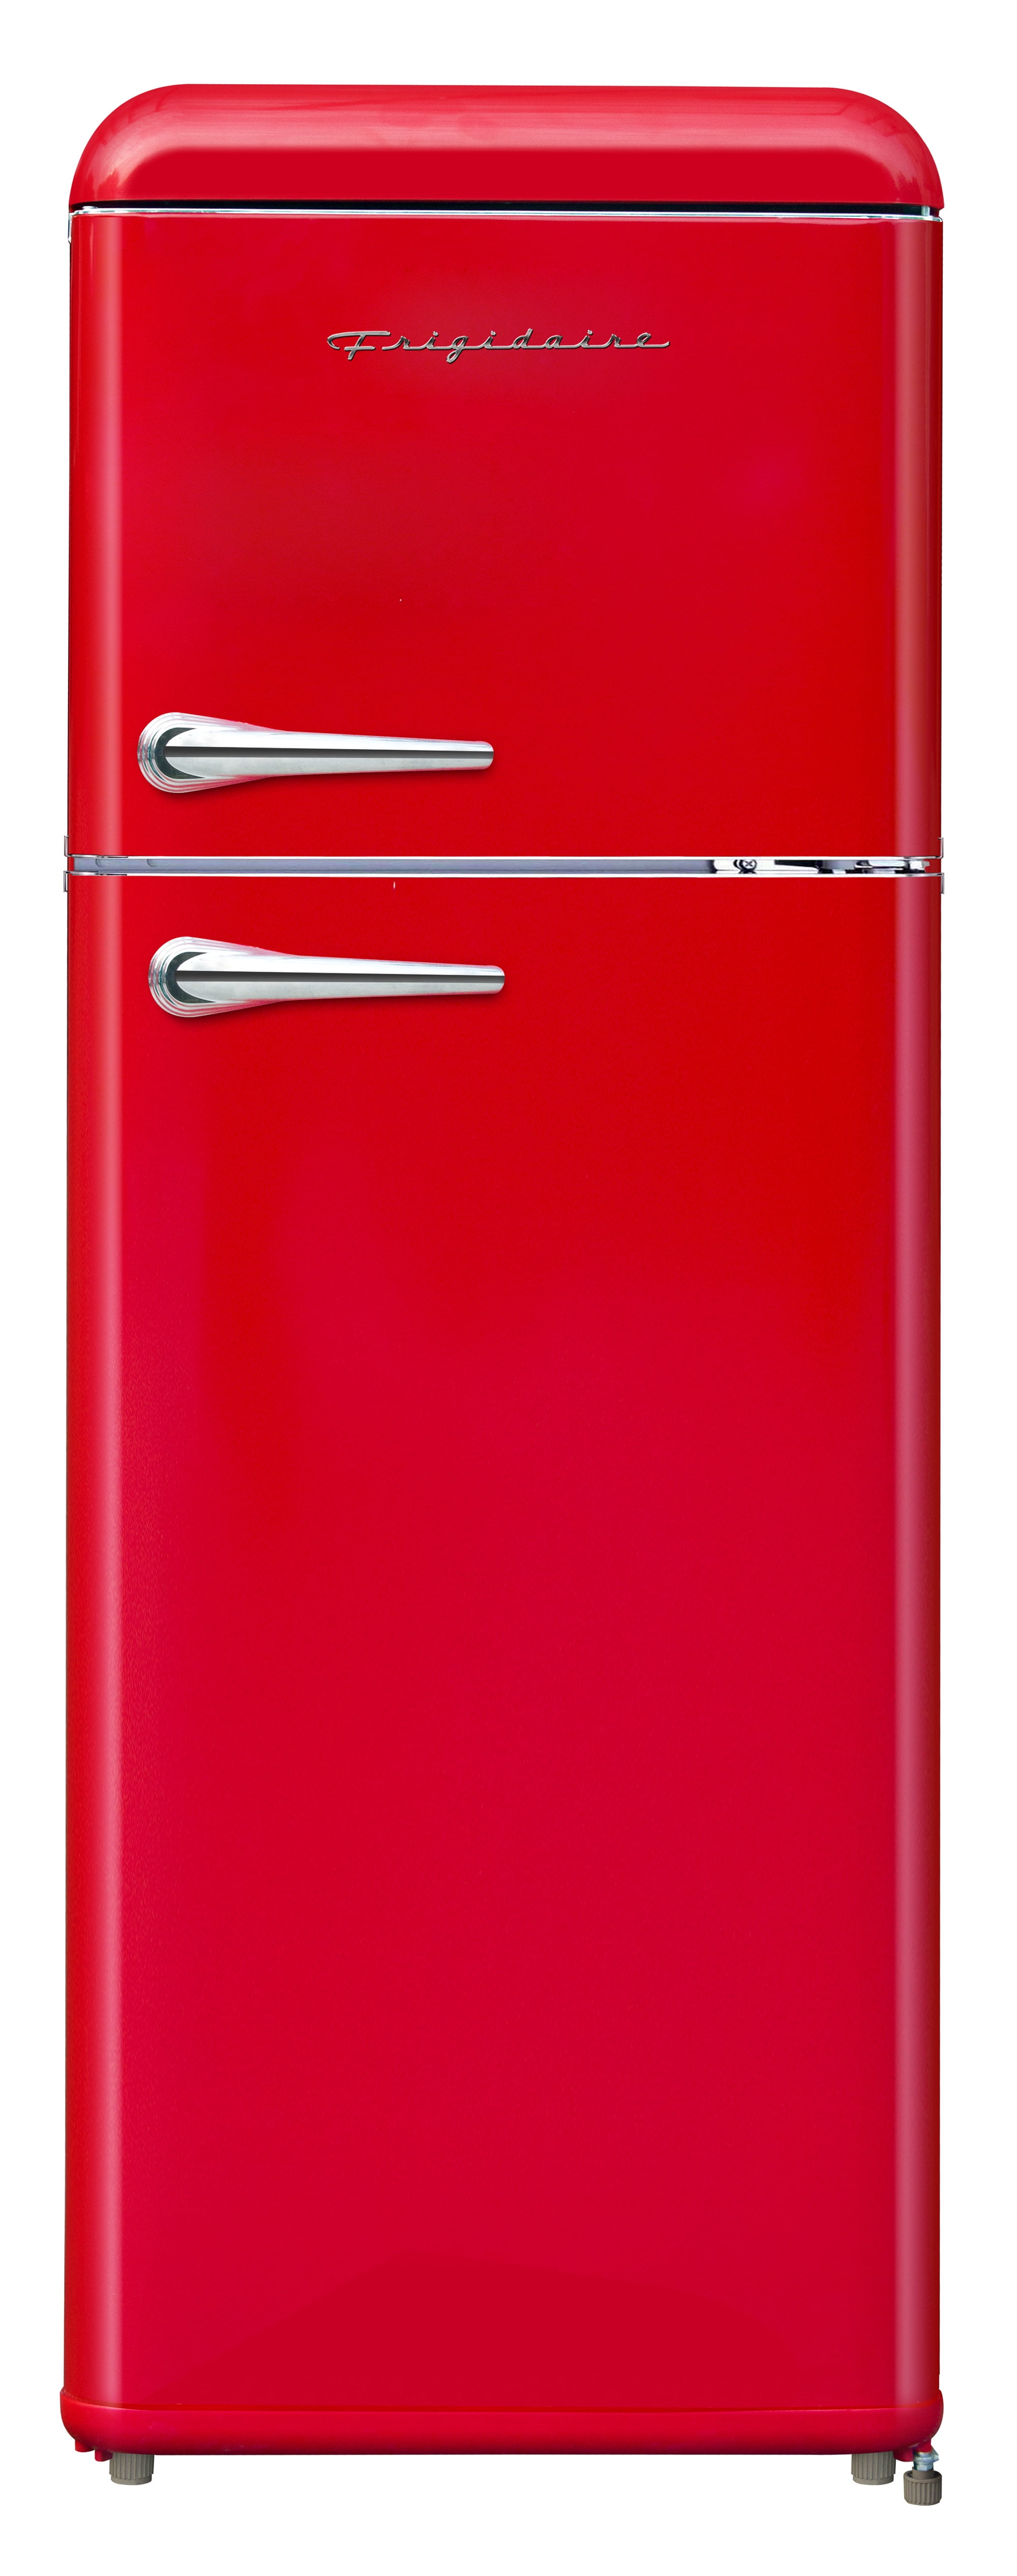 Frigidaire 7.5 Cu. Ft. Top Freezer Refrigerator in RED, Rounded Corners ...